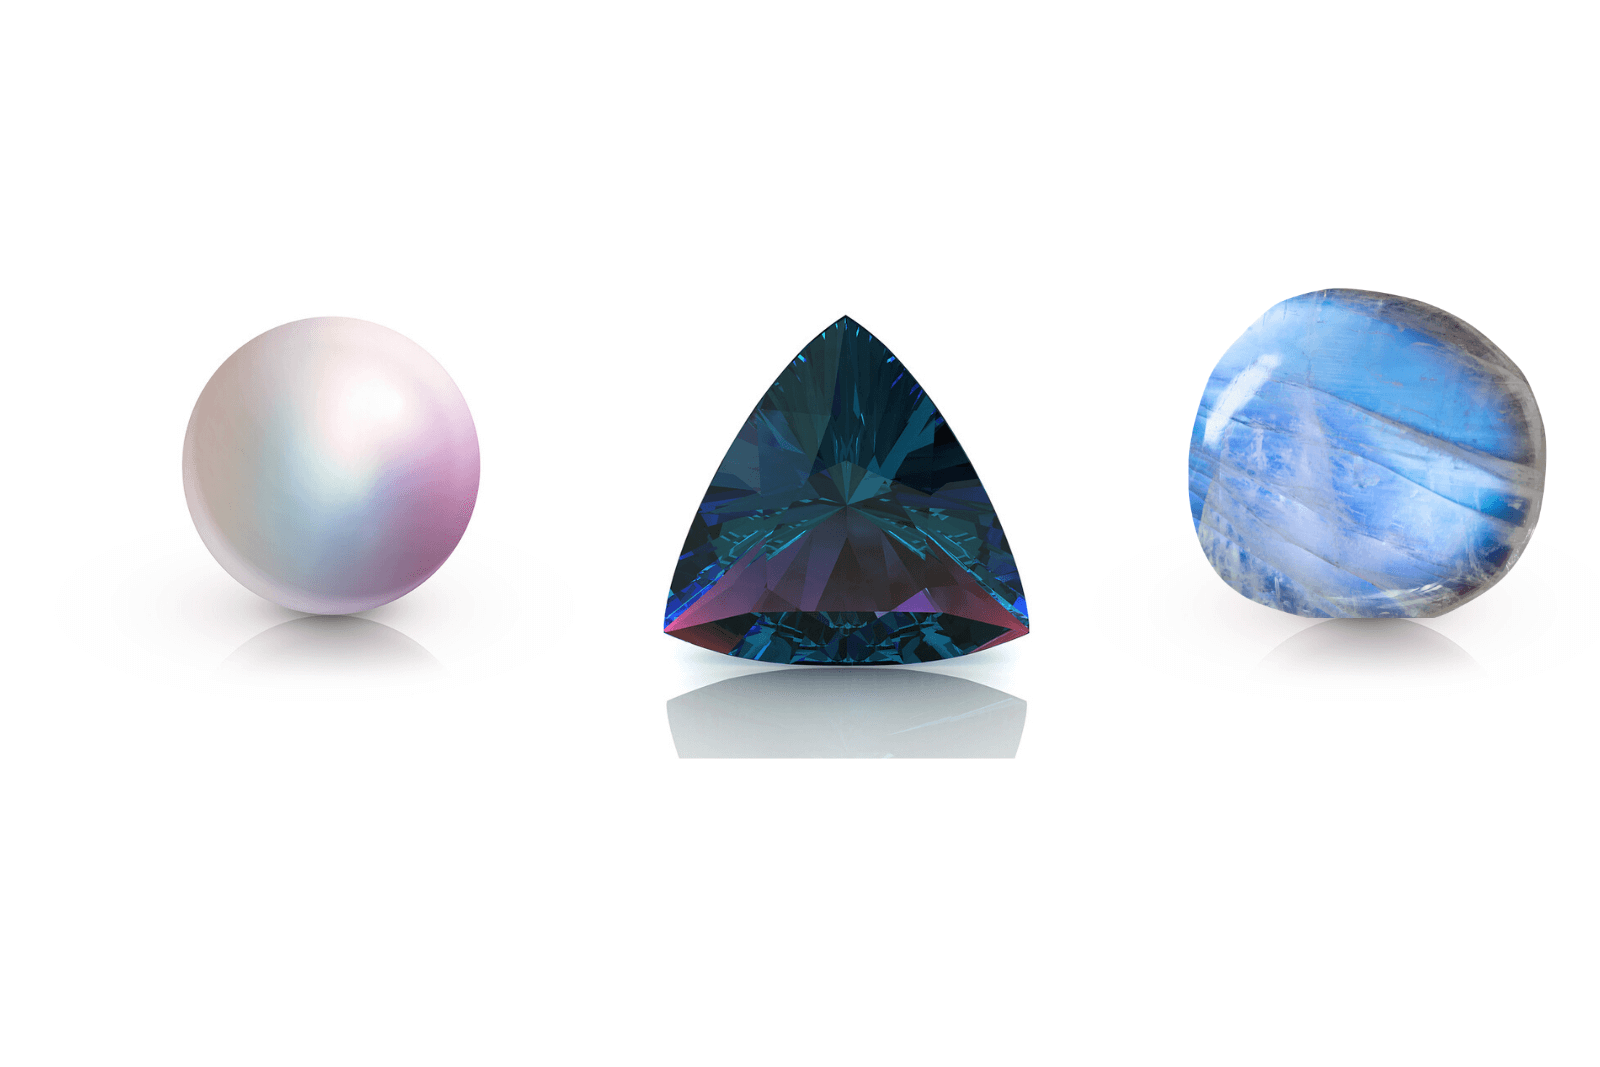 Alexandrite, Pearl, or Moonstone: Which June’s Birthstone is the Right One for You?